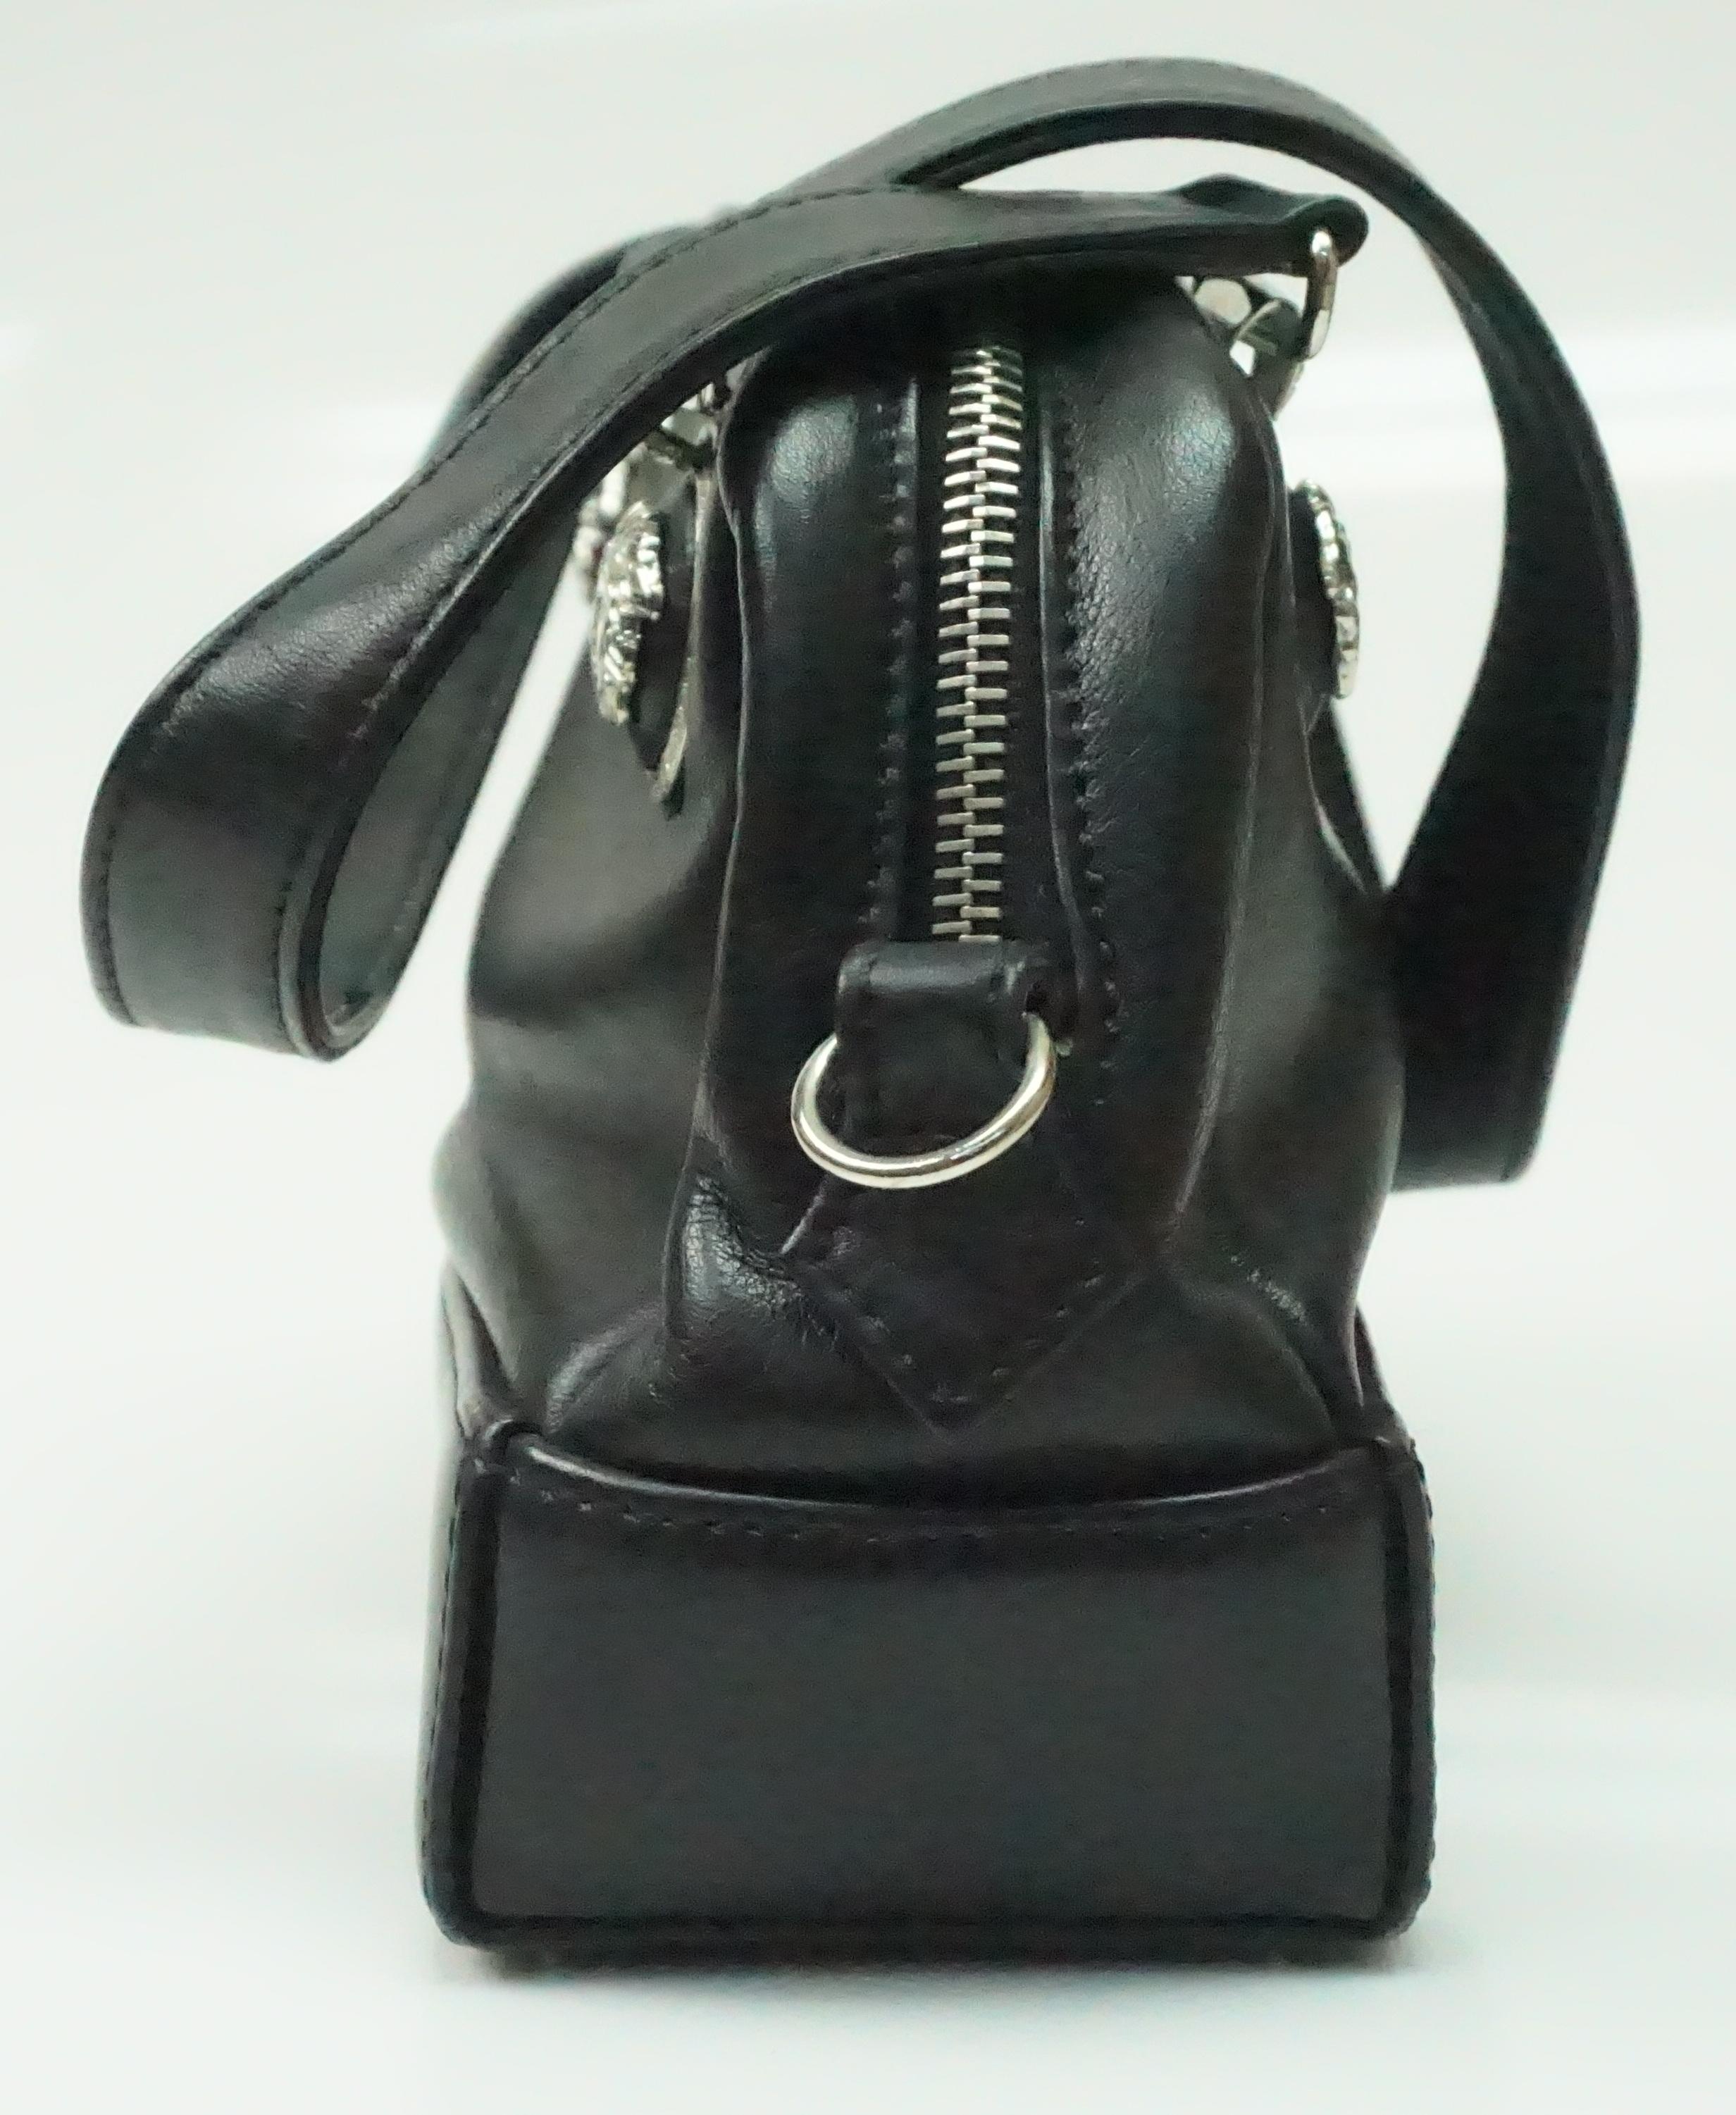 Versace Couture BLACK leather cross body Purse. This fabulous Versace cross body is in great condition. It shows barely any sign of use, it has one small white scuff/mark on the front left corner and slight aging on one of the cross body leather